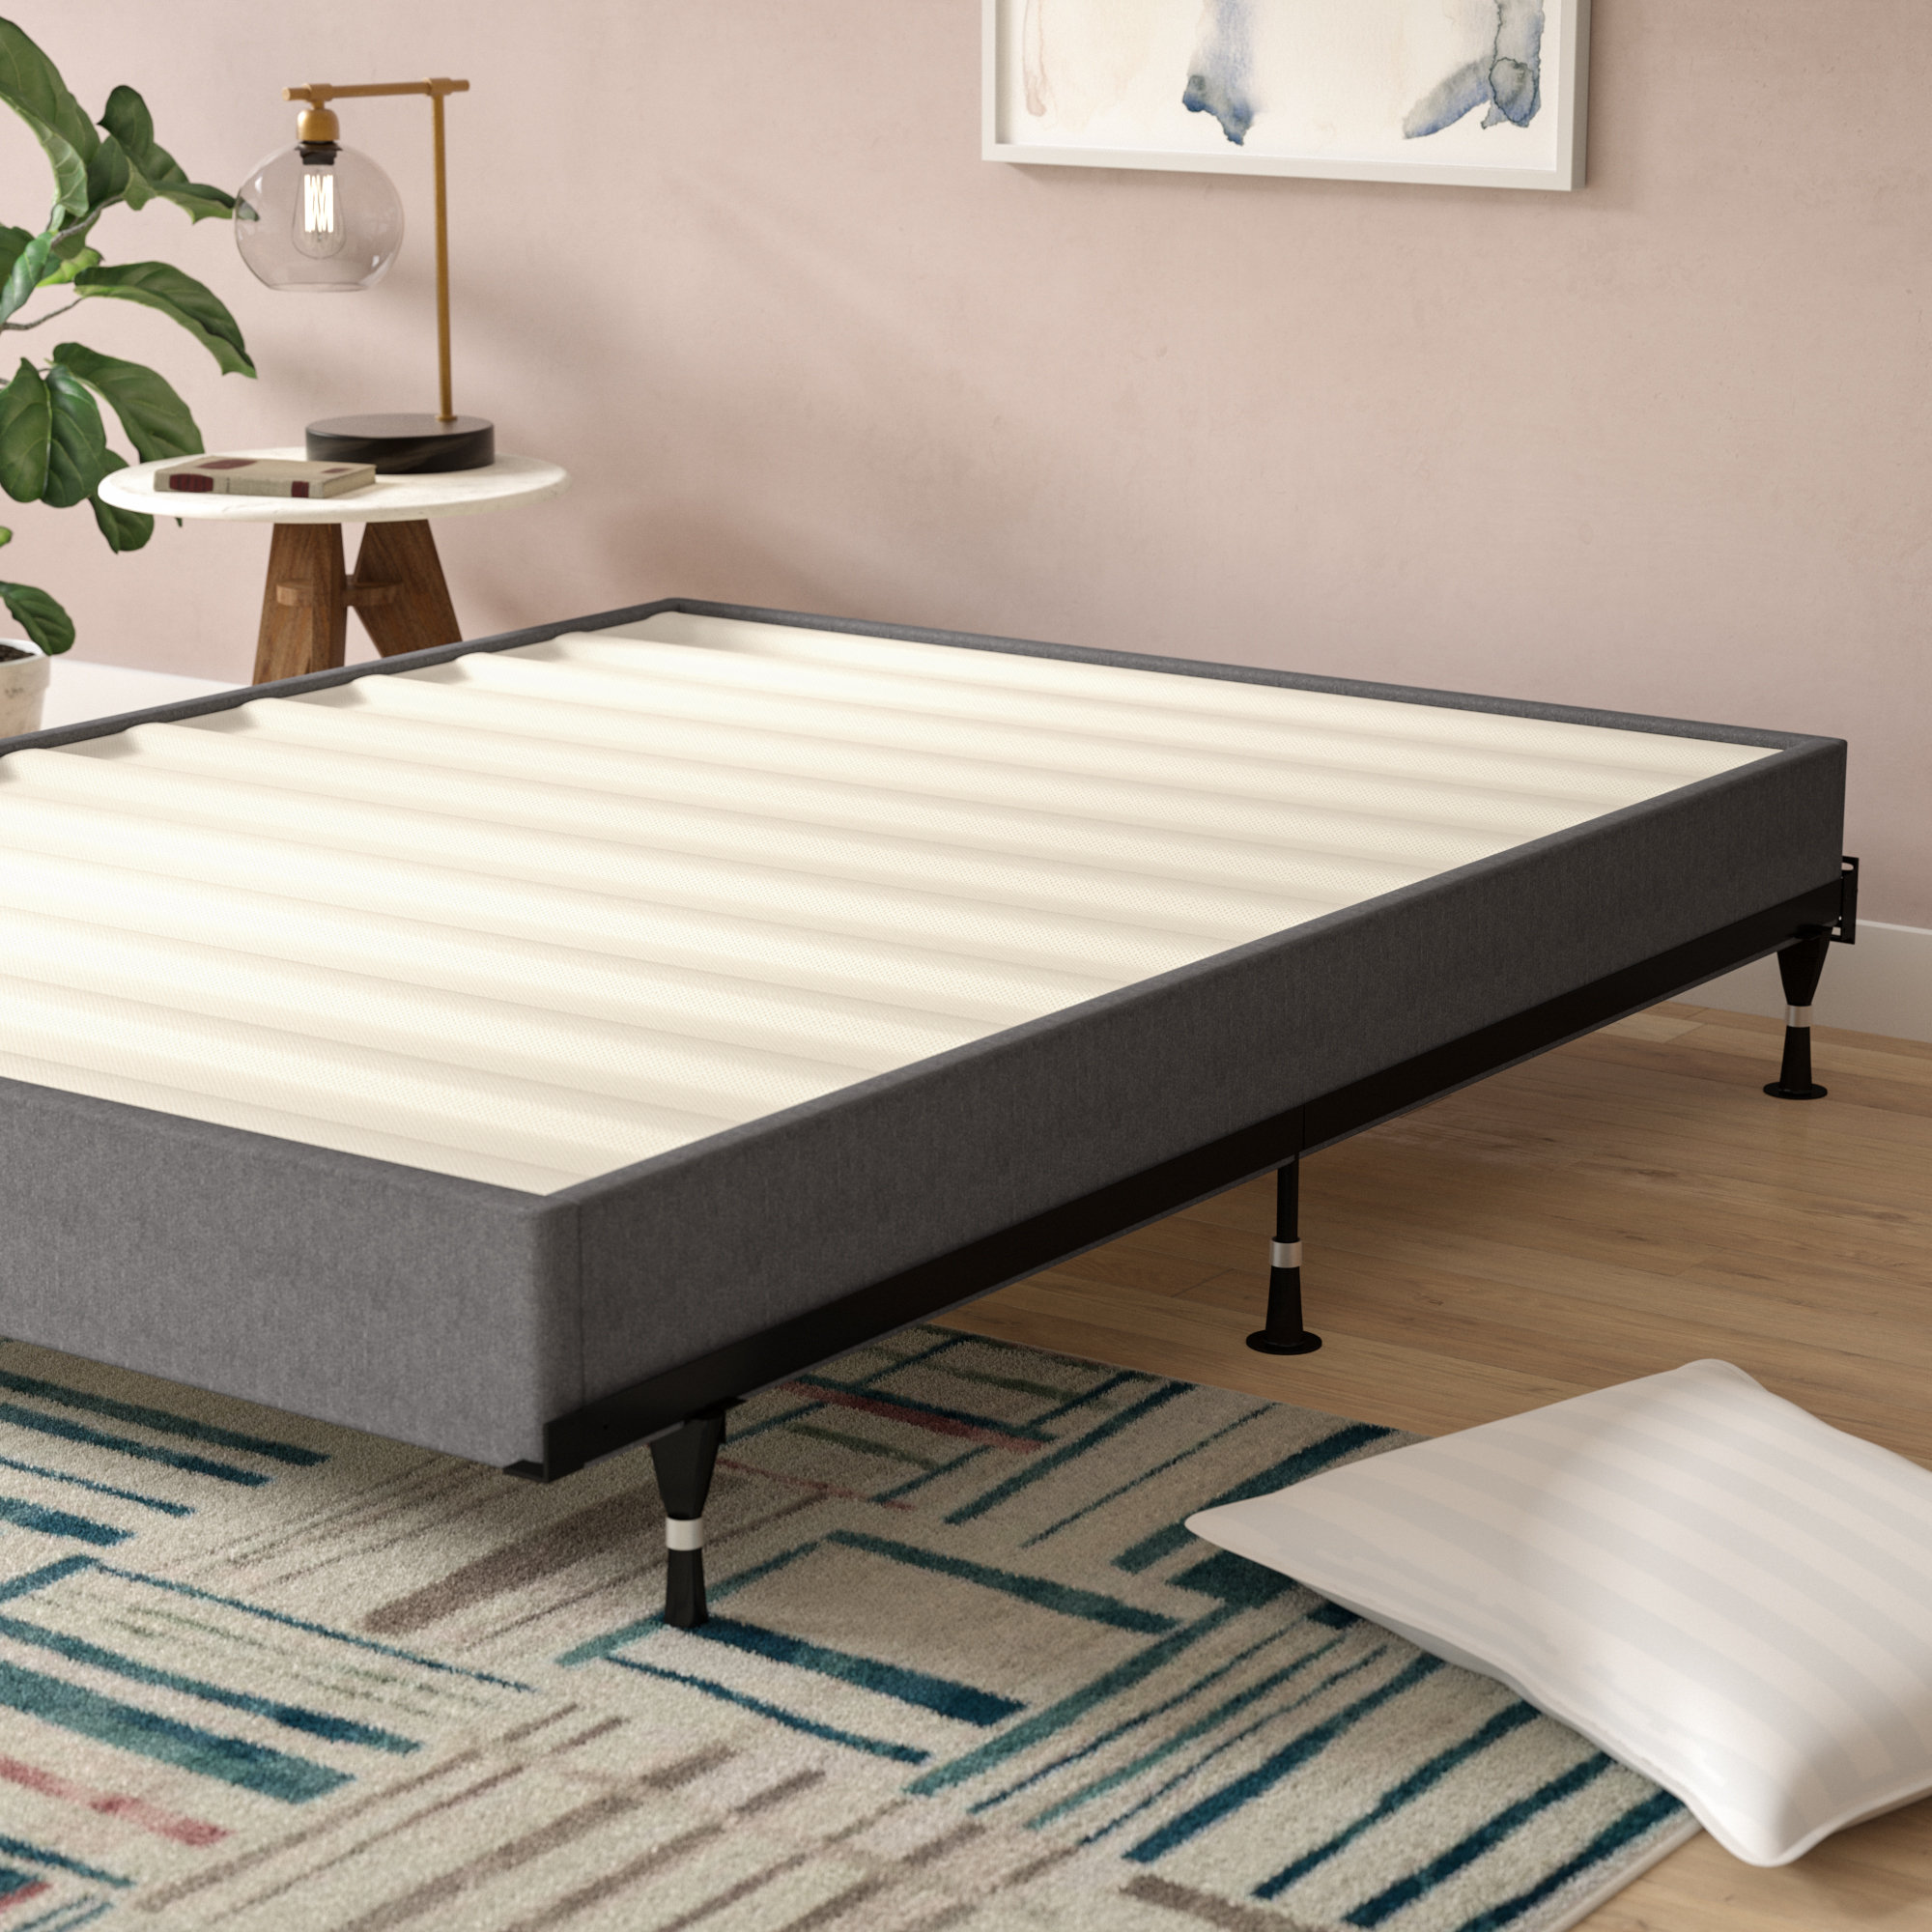 Nectar Mattress Bed Reviews 2022 Why You Should Buy Or Pass